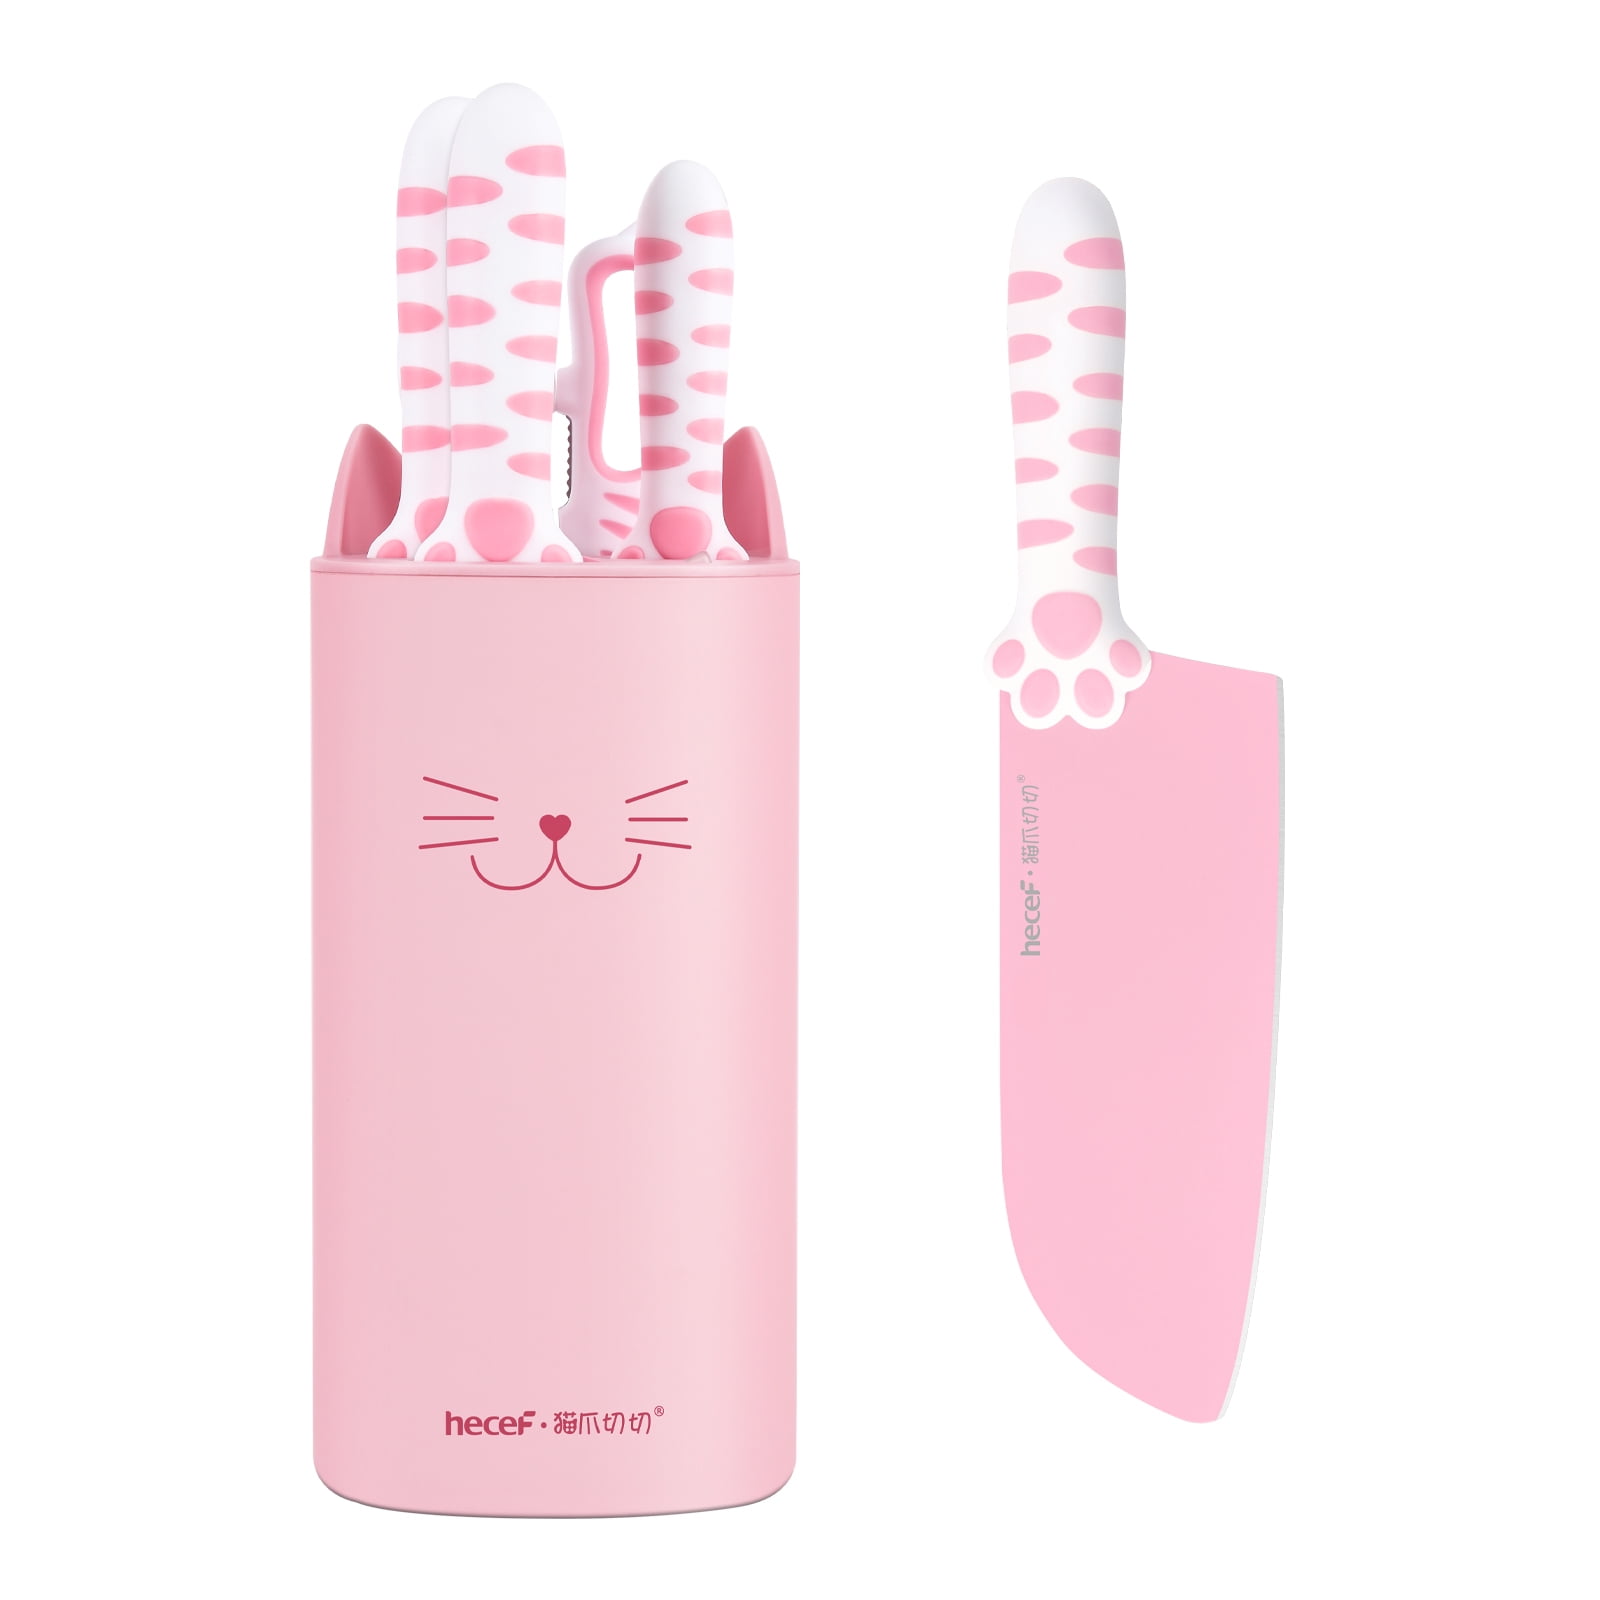 Needed this pink knife block set from  for my kitchen! It matche